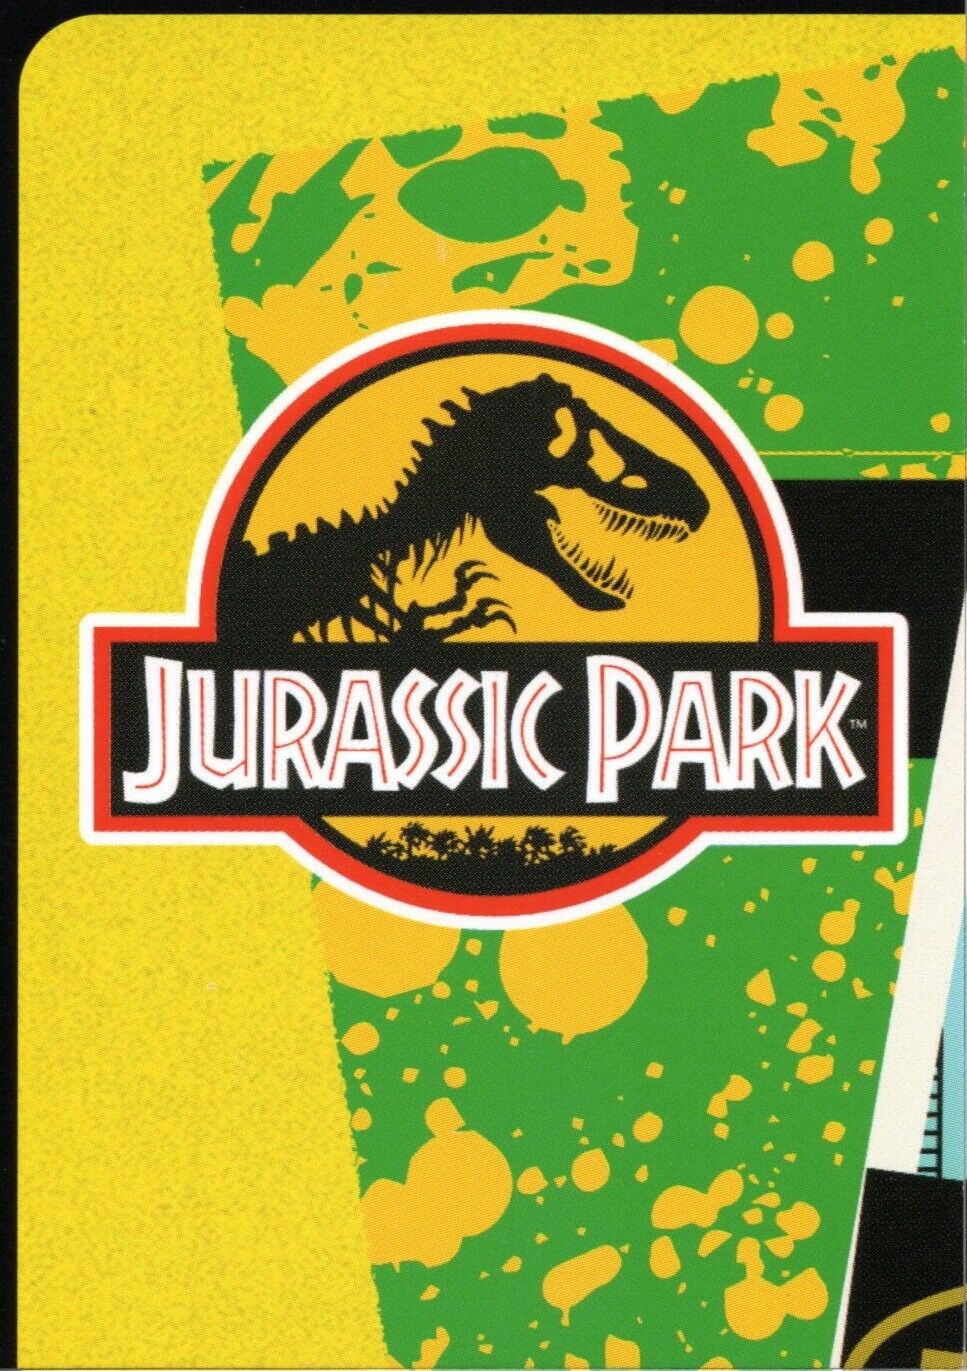 Panini Jurassic Park 30th Anniversary Celebration Collection trading cards 1-195